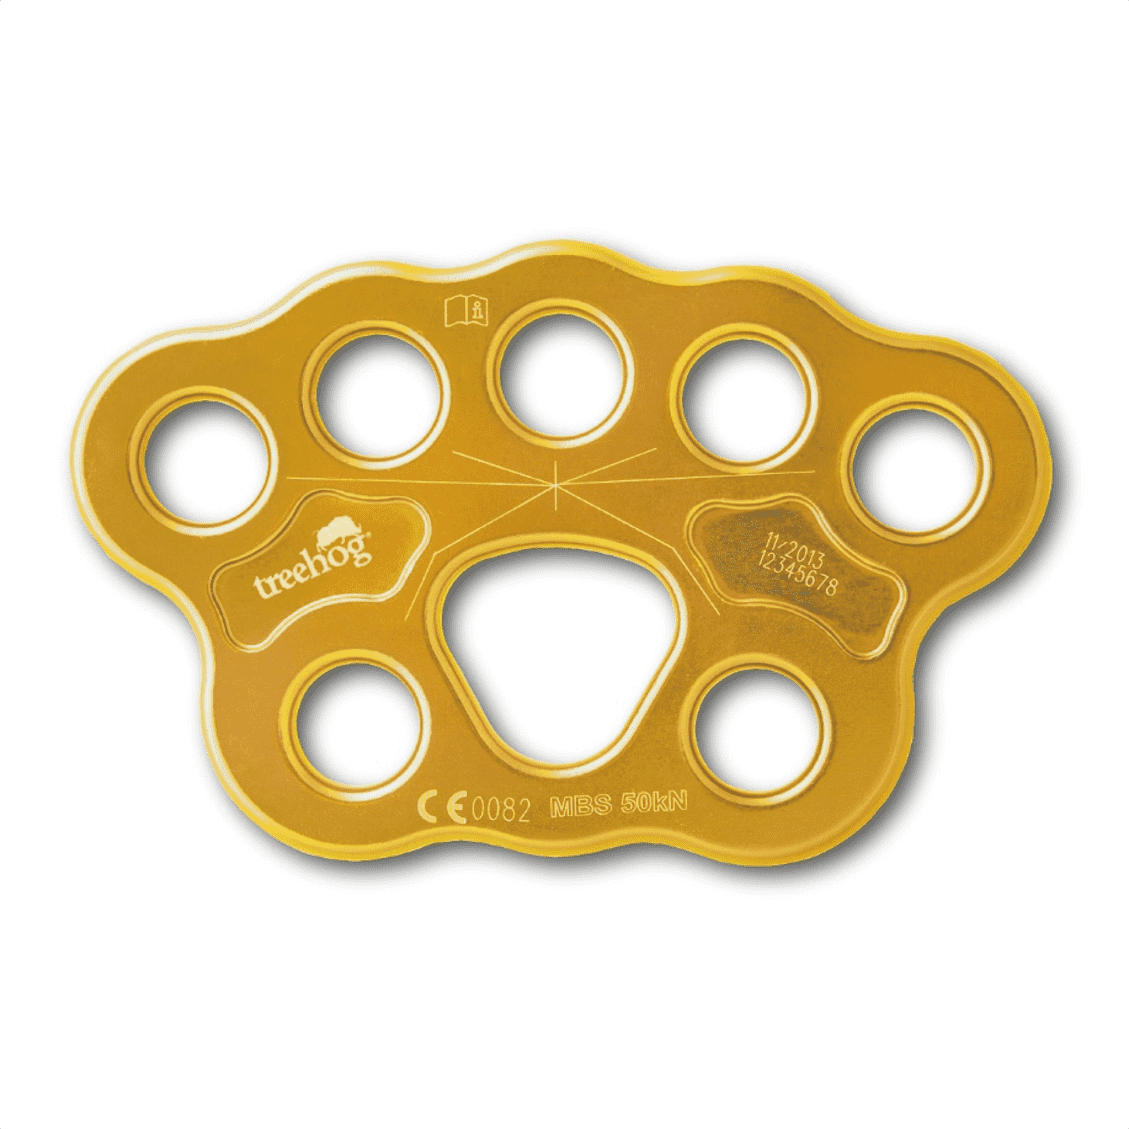 THRP2 Rigging Plate 8 Hole